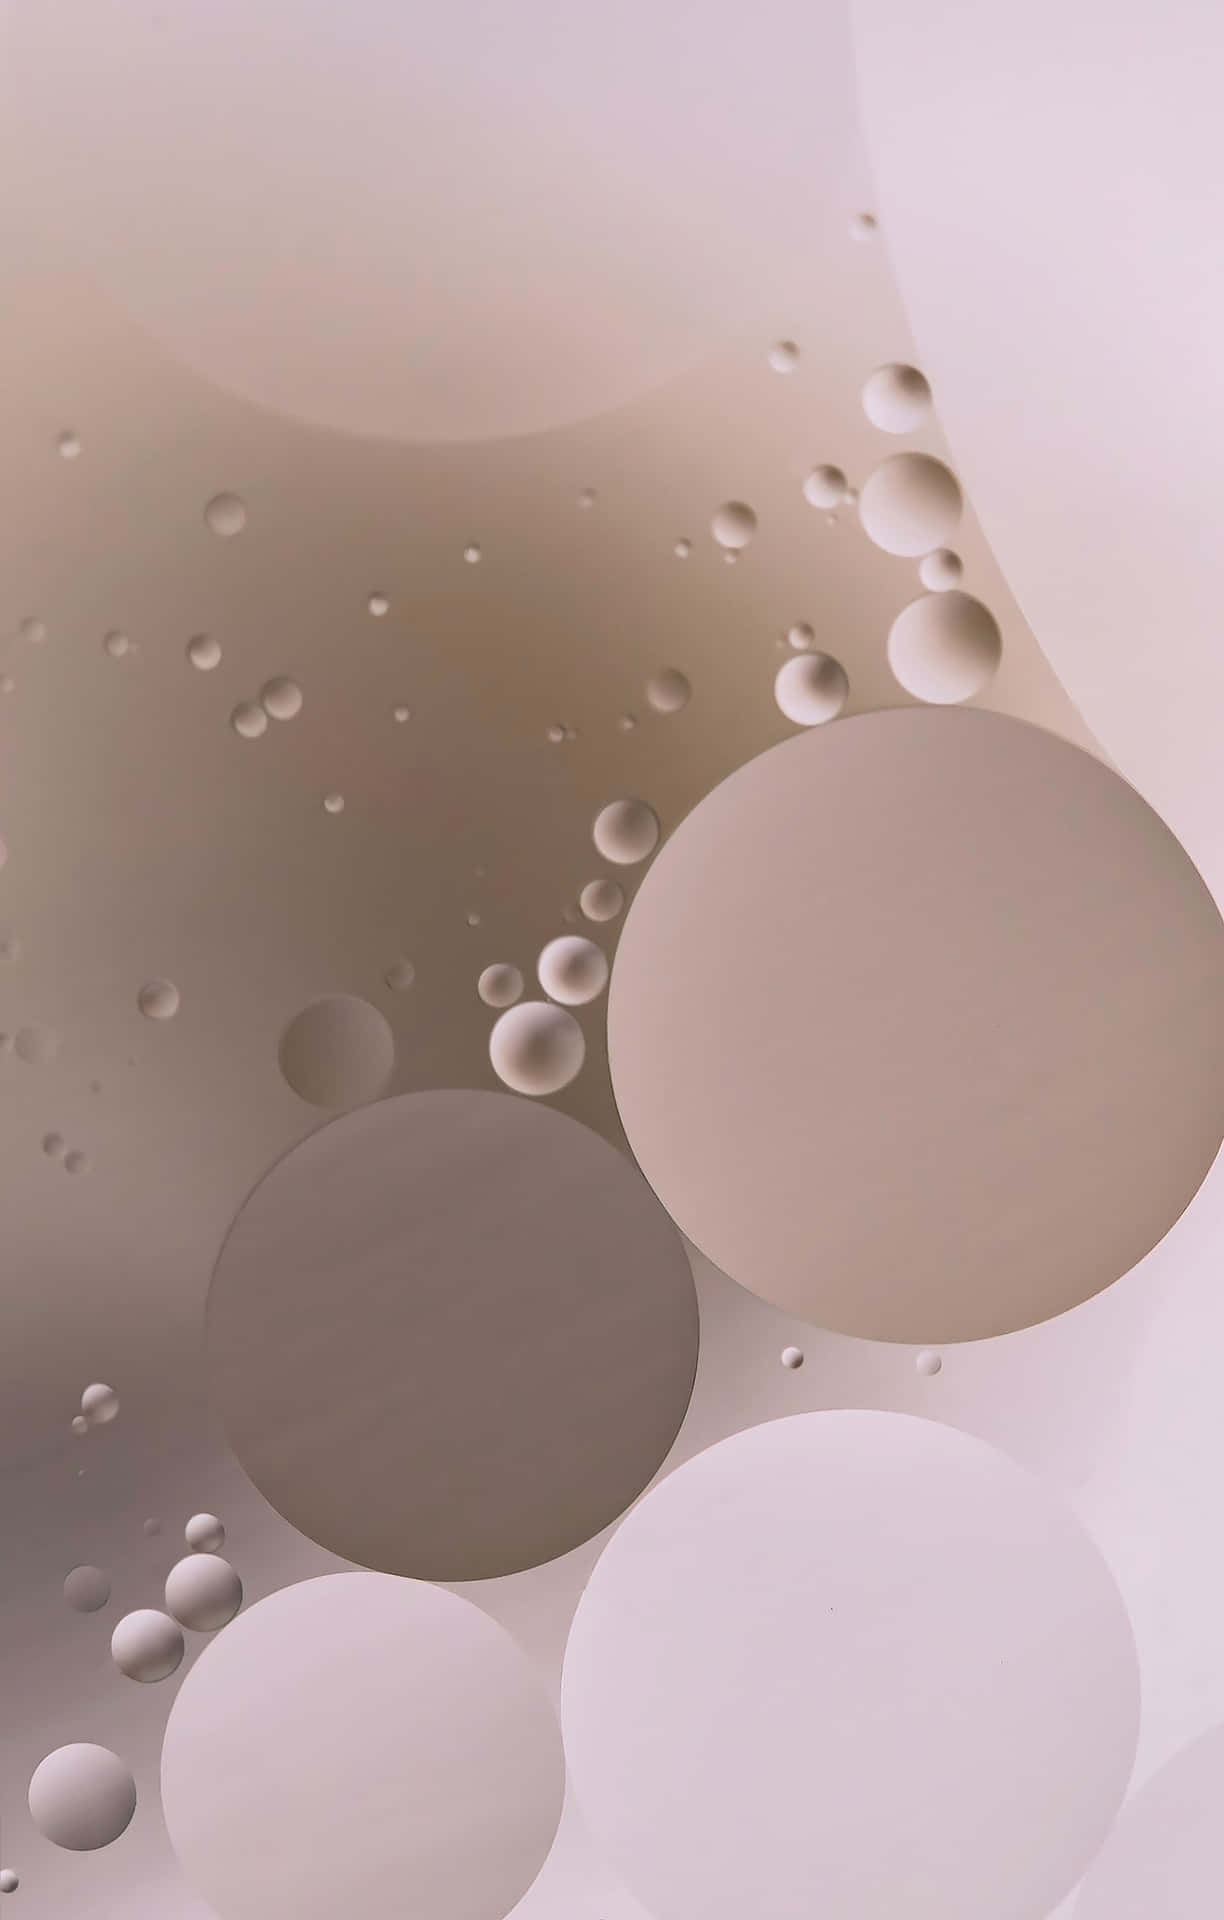 A White Background With Circles And Bubbles